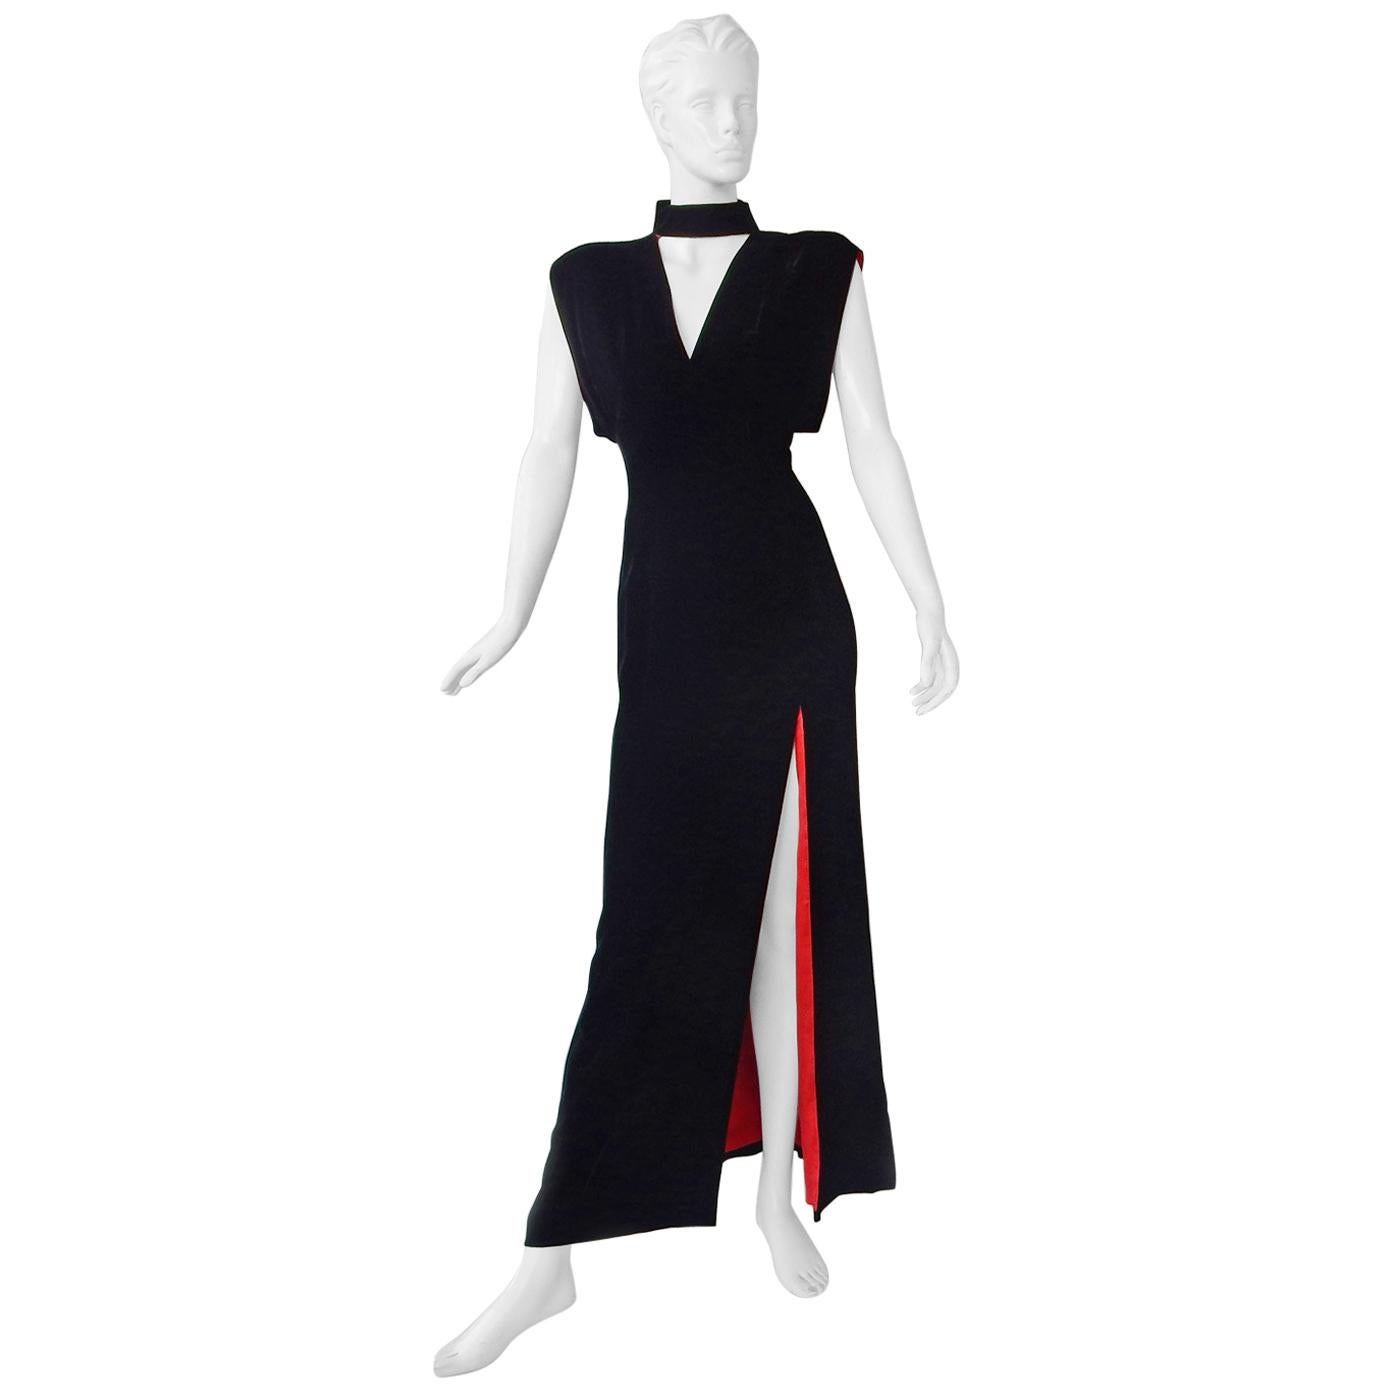 Thierry Mugler Couture Old Hollywood Glamour 30's Style Dress Gown